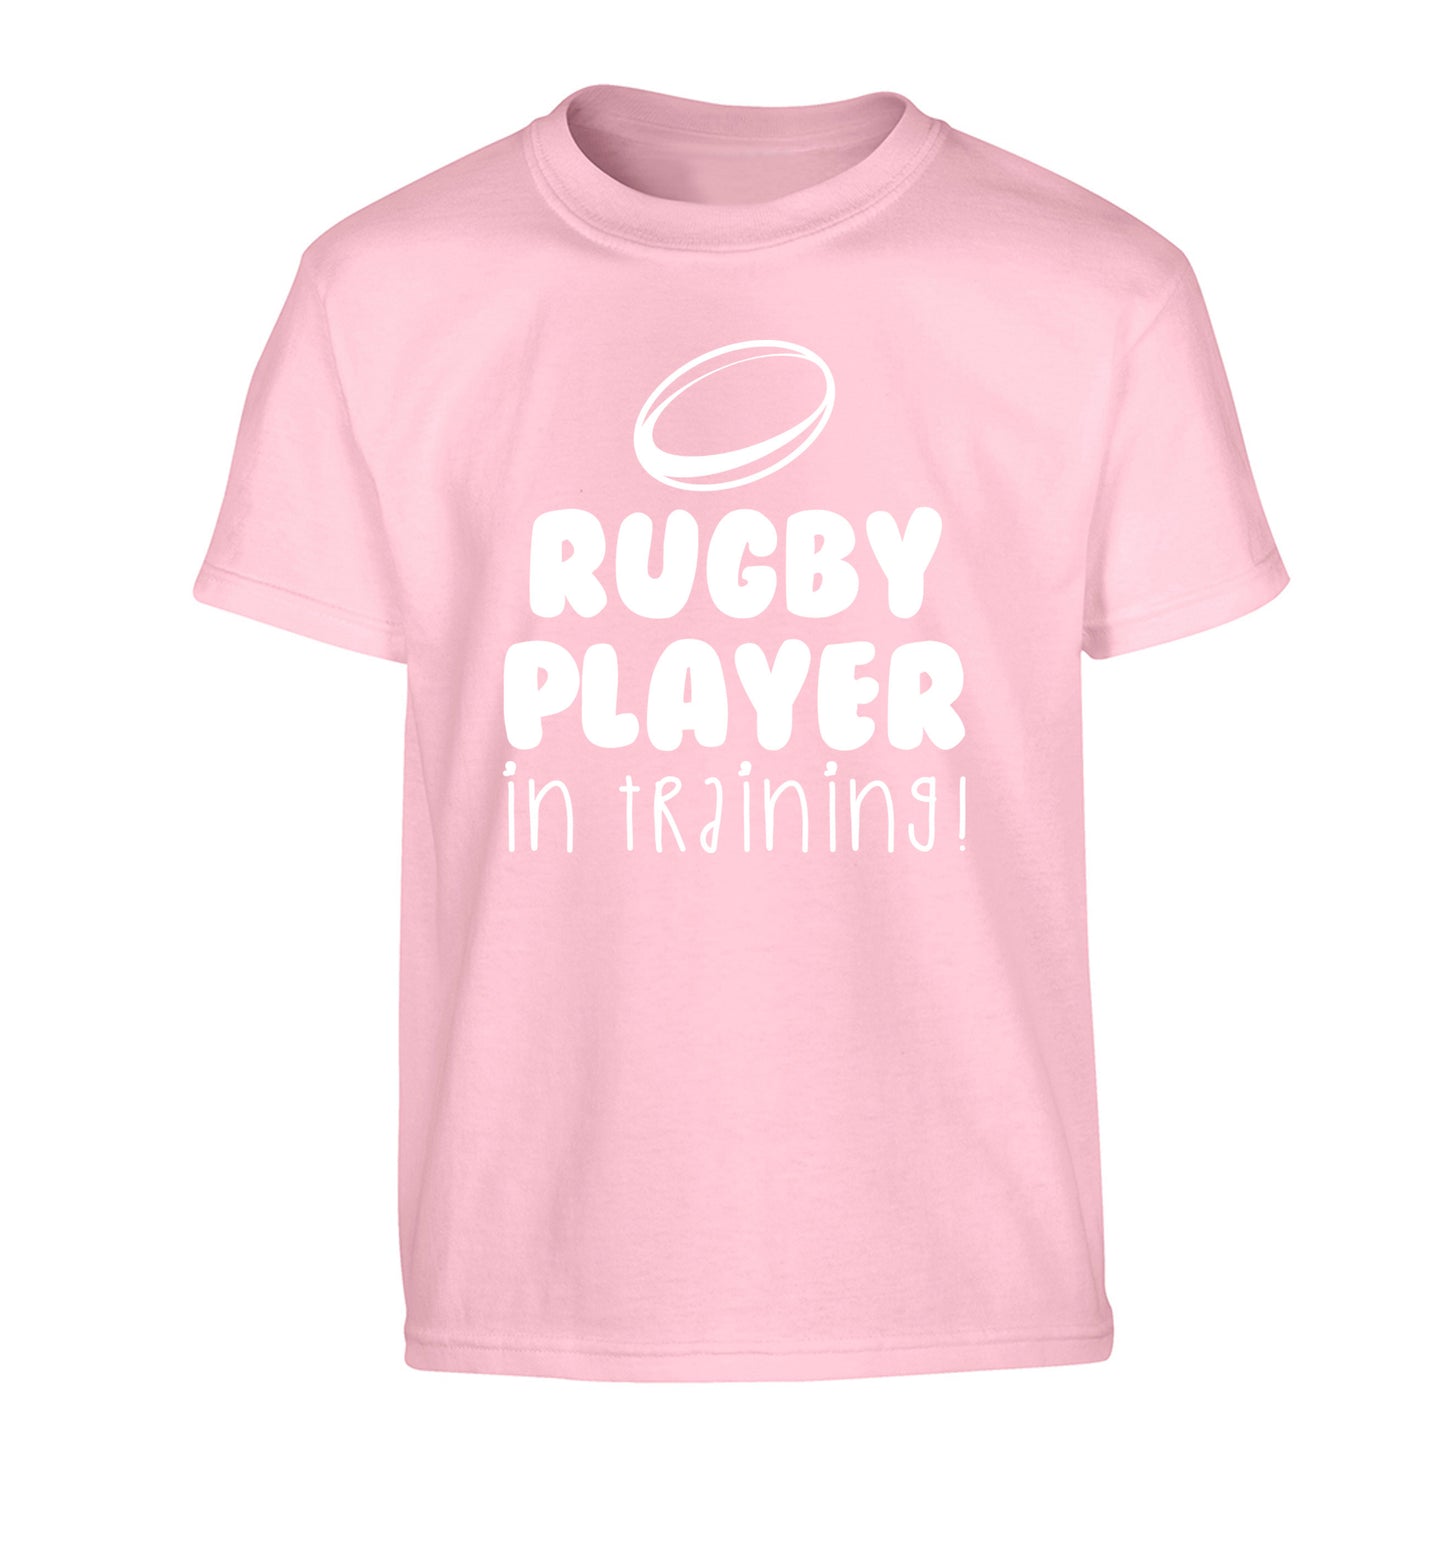 Rugby player in training Children's light pink Tshirt 12-14 Years